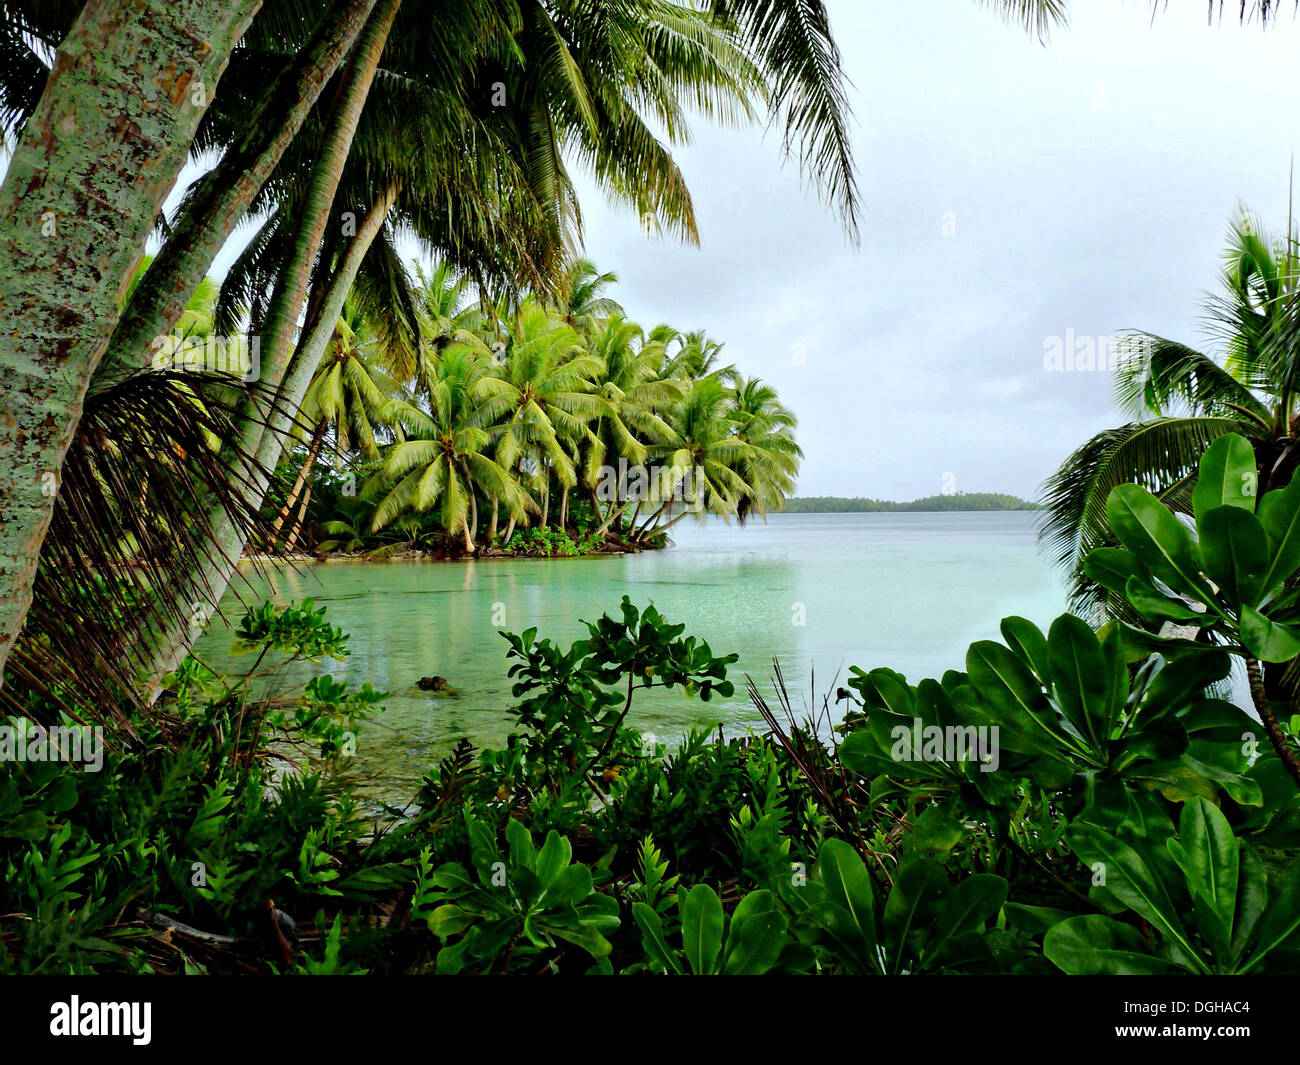 Strawn Island Lagoon on Palmyra Atoll in the South Pacific. Stock Photo